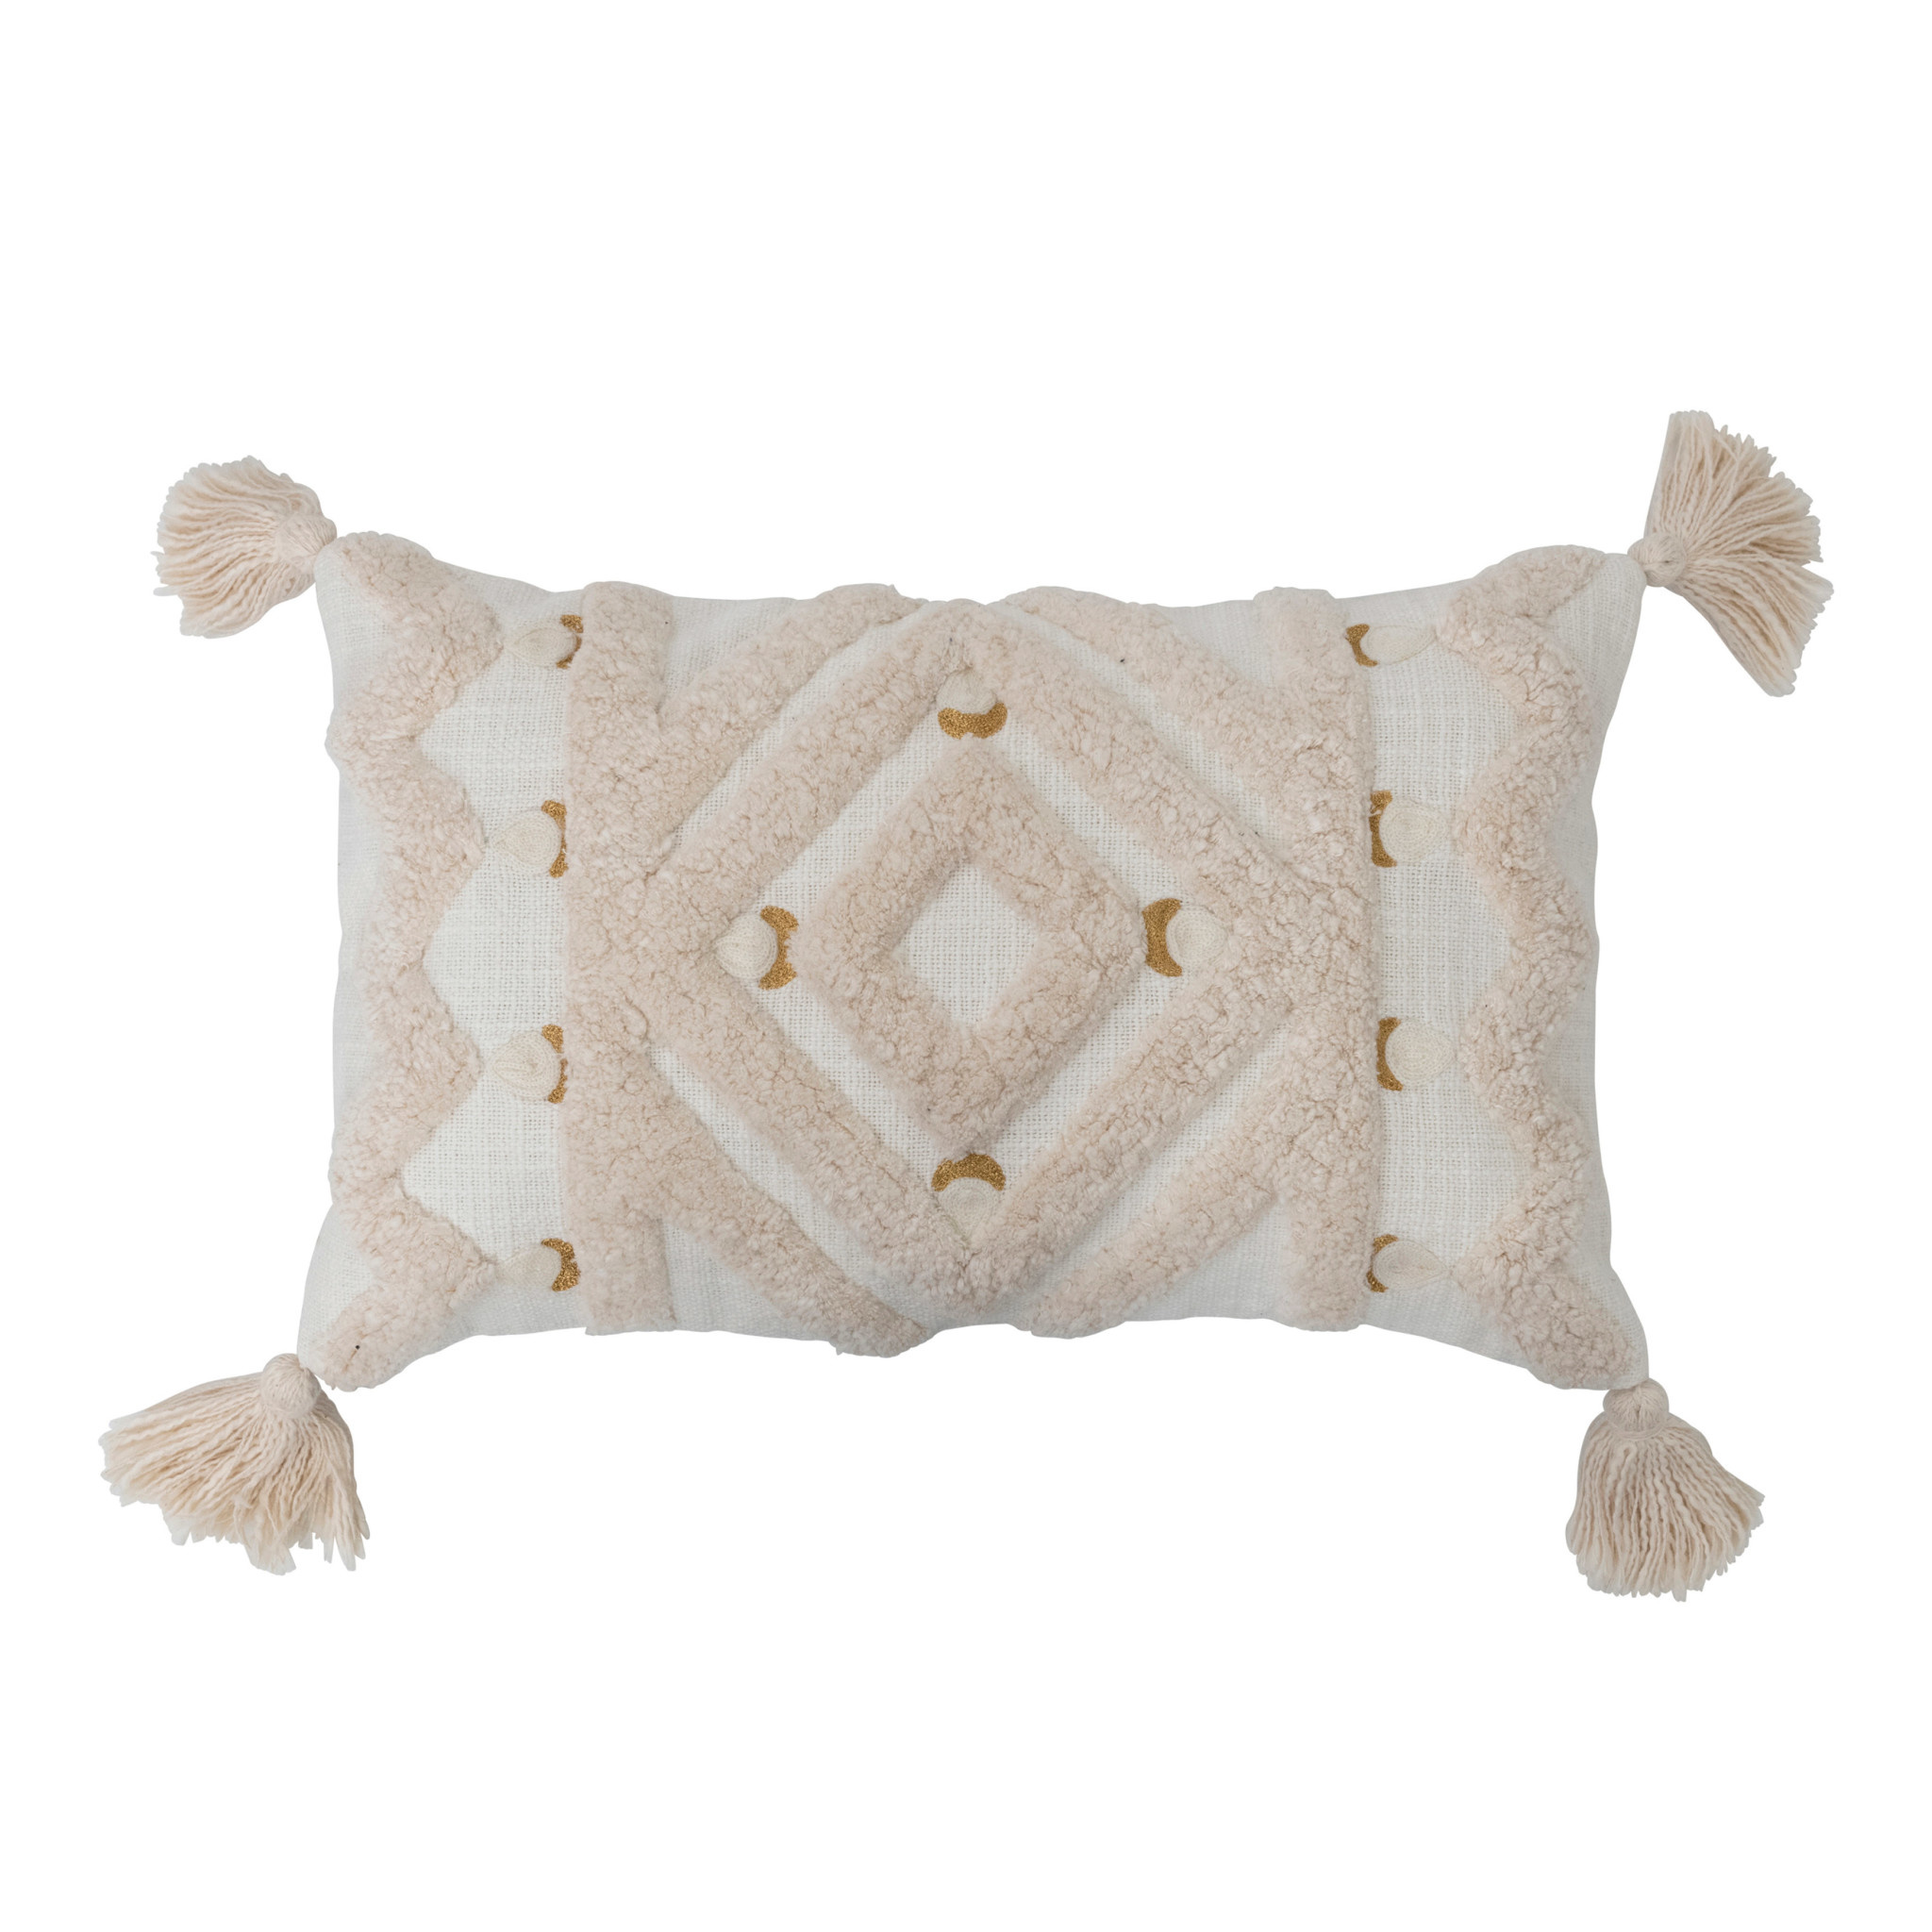 Embroidery & Tassels Cotton Tufted Lumbar Pillow , Cream & Gold